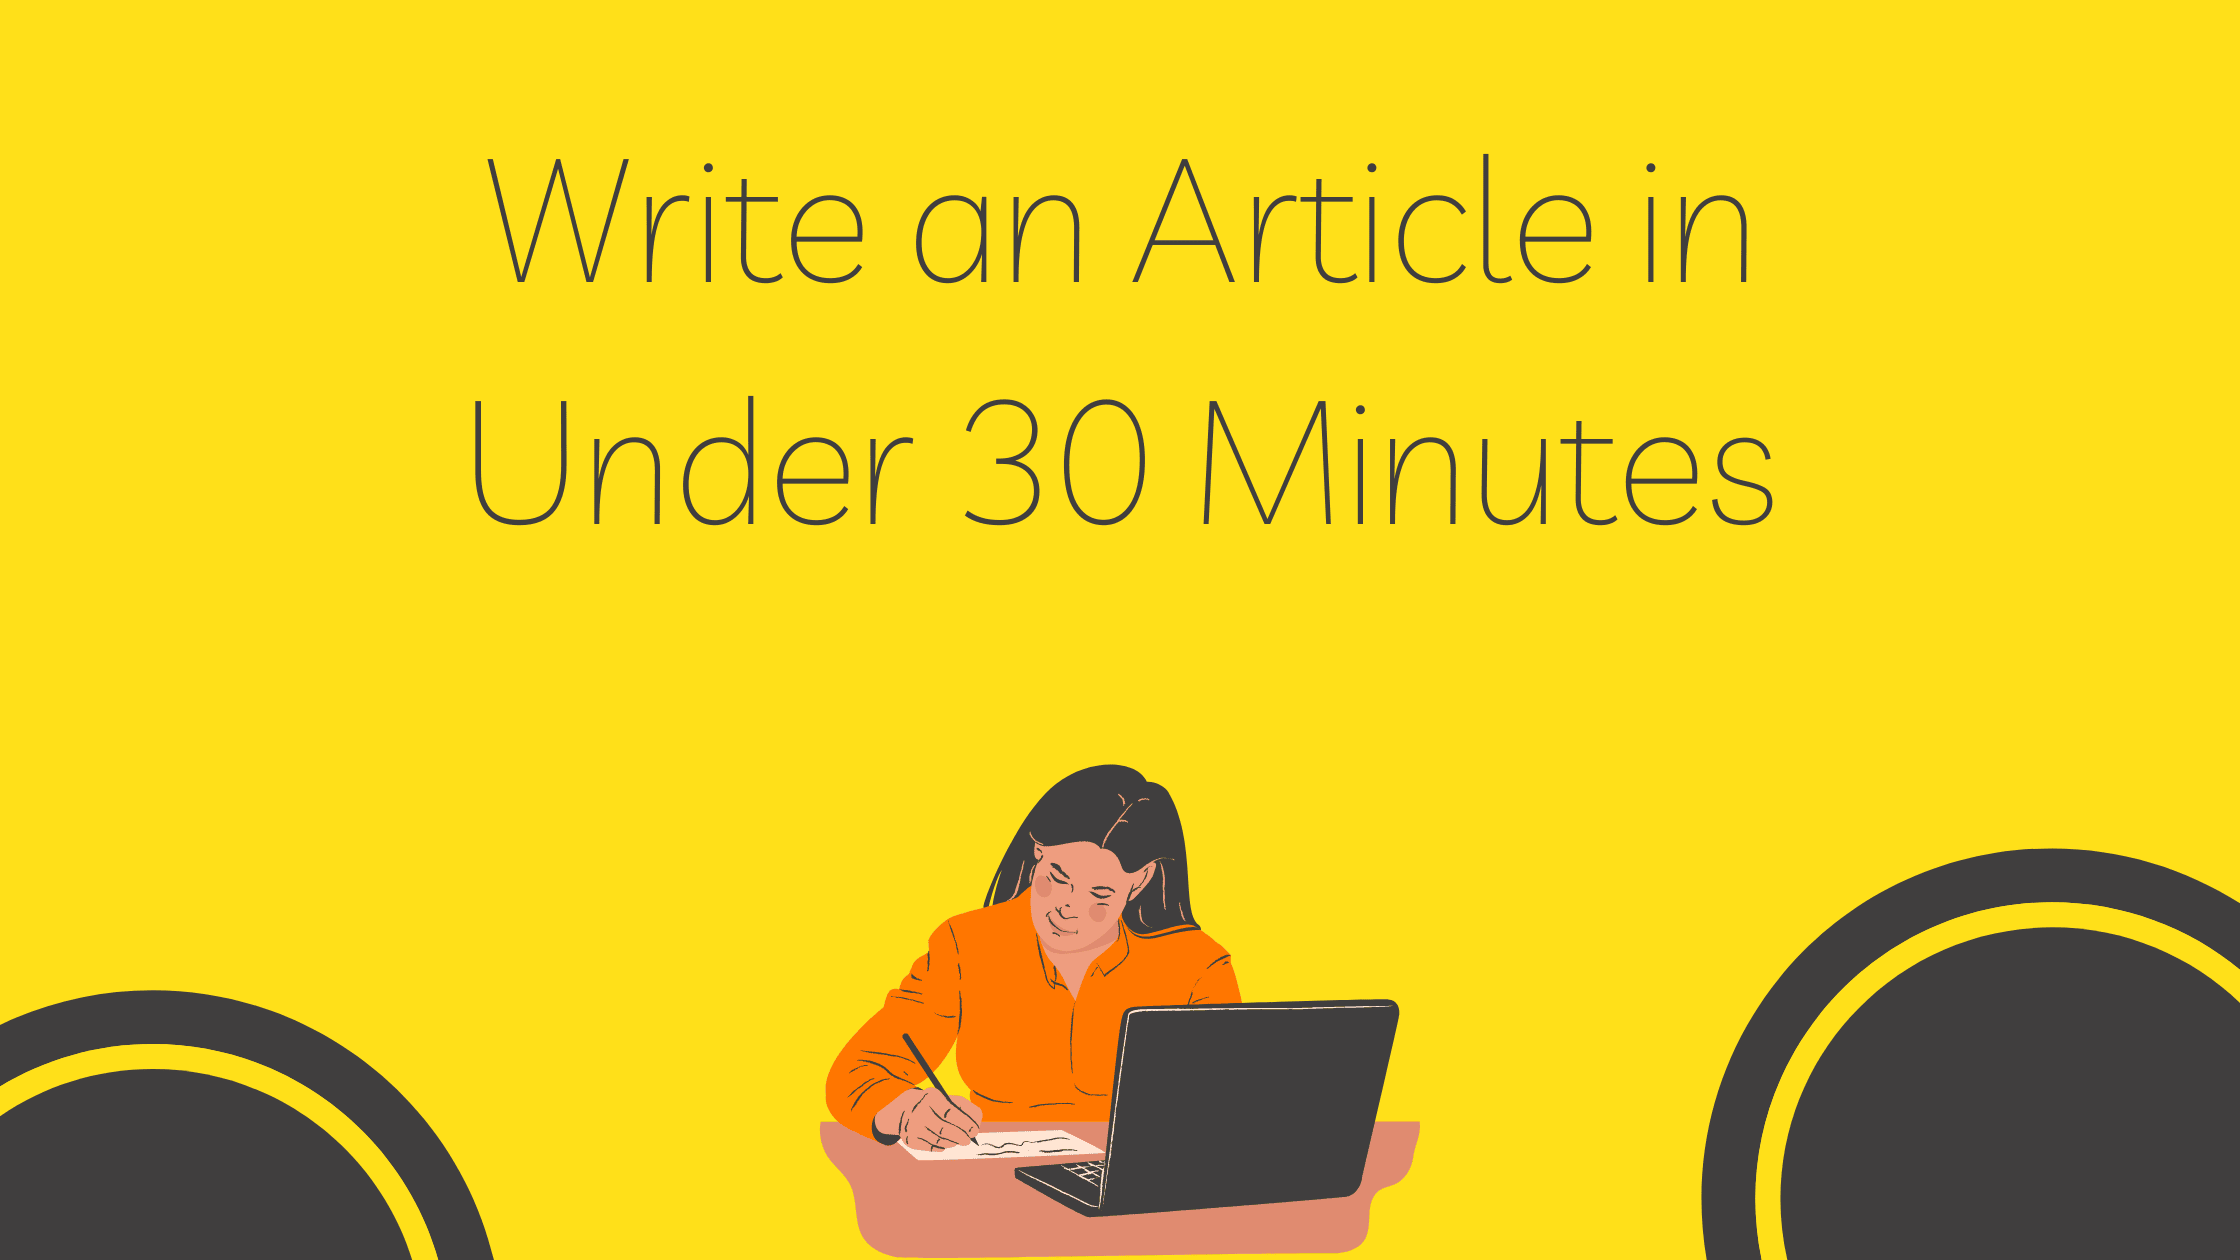 Write an Article in Under 30 Minutes